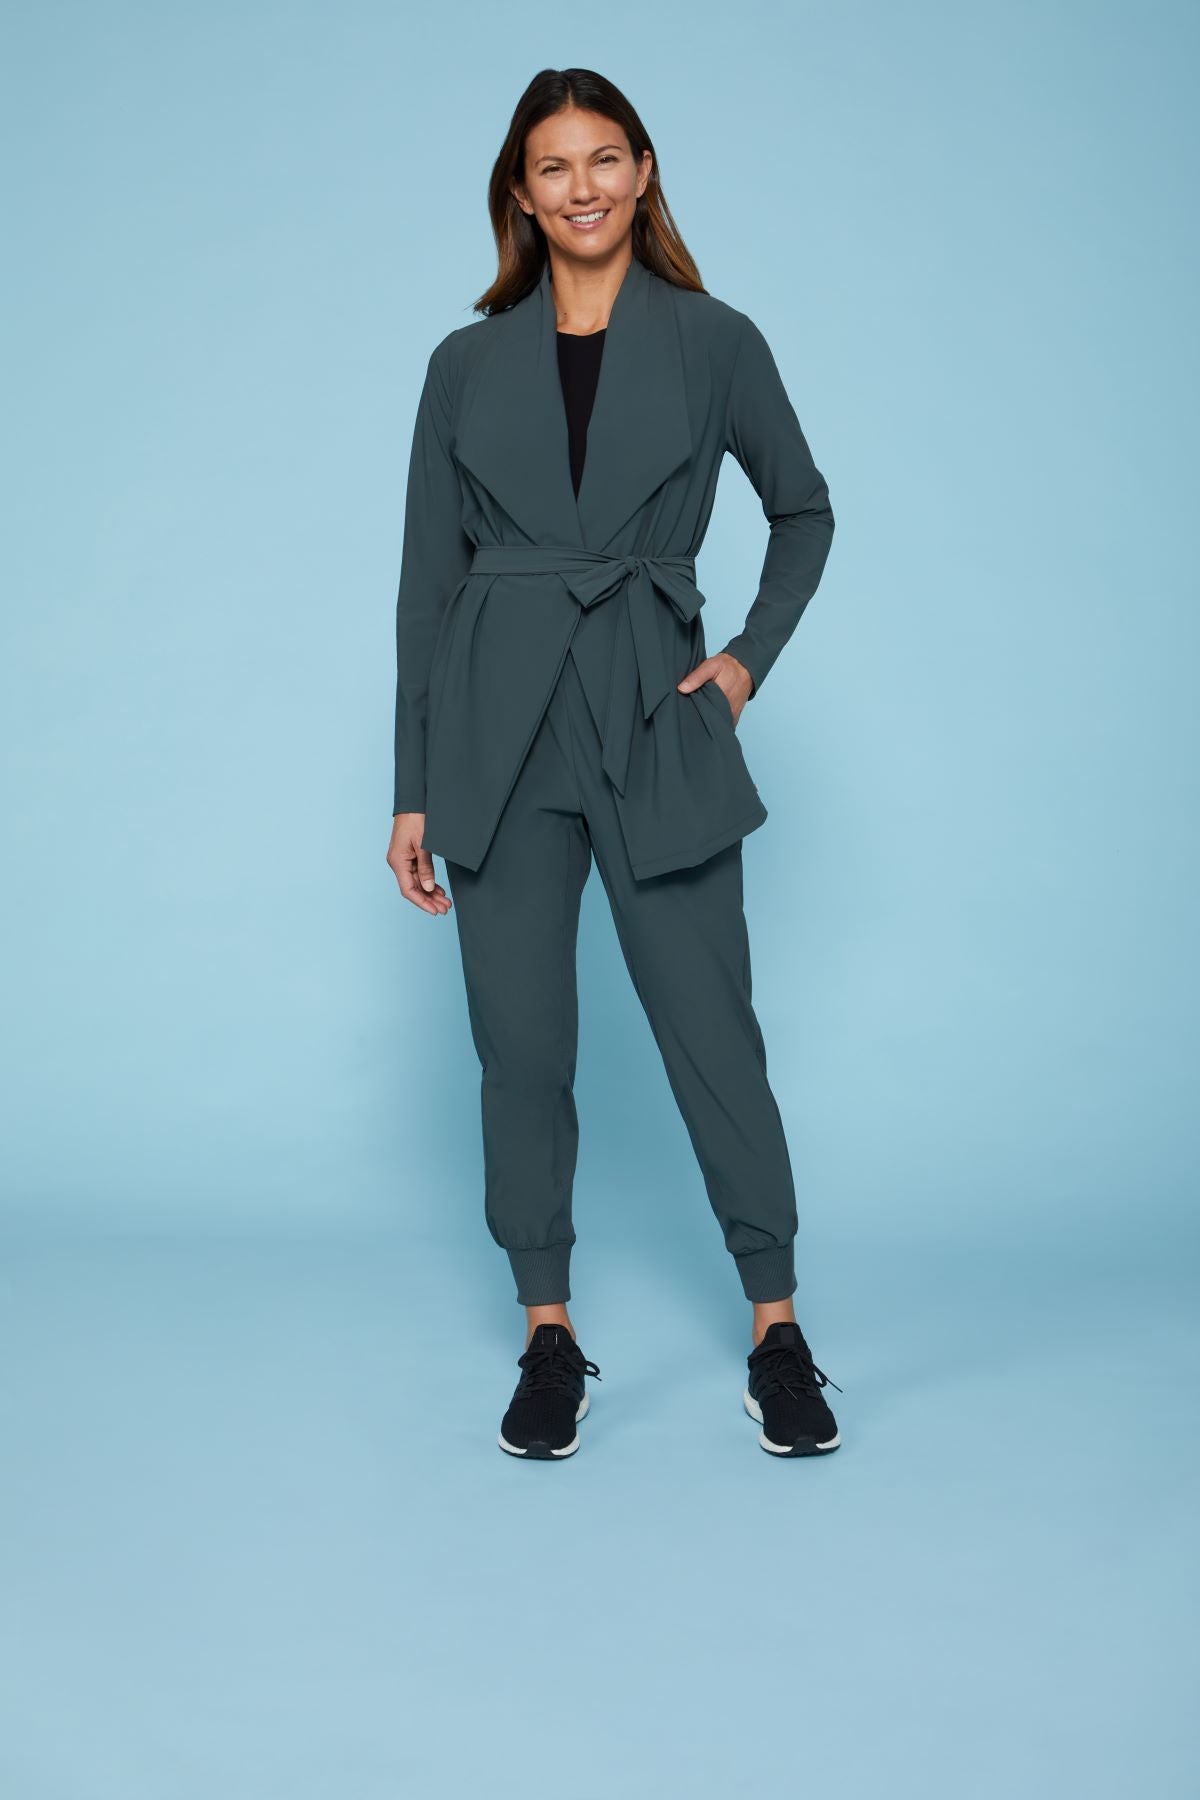 A 3-piece set consisting of a sweatshirt, ribbed short leggings and a top  is the perfect outfit for women who value fashionable and comfortable style  - Poland, New - The wholesale platform